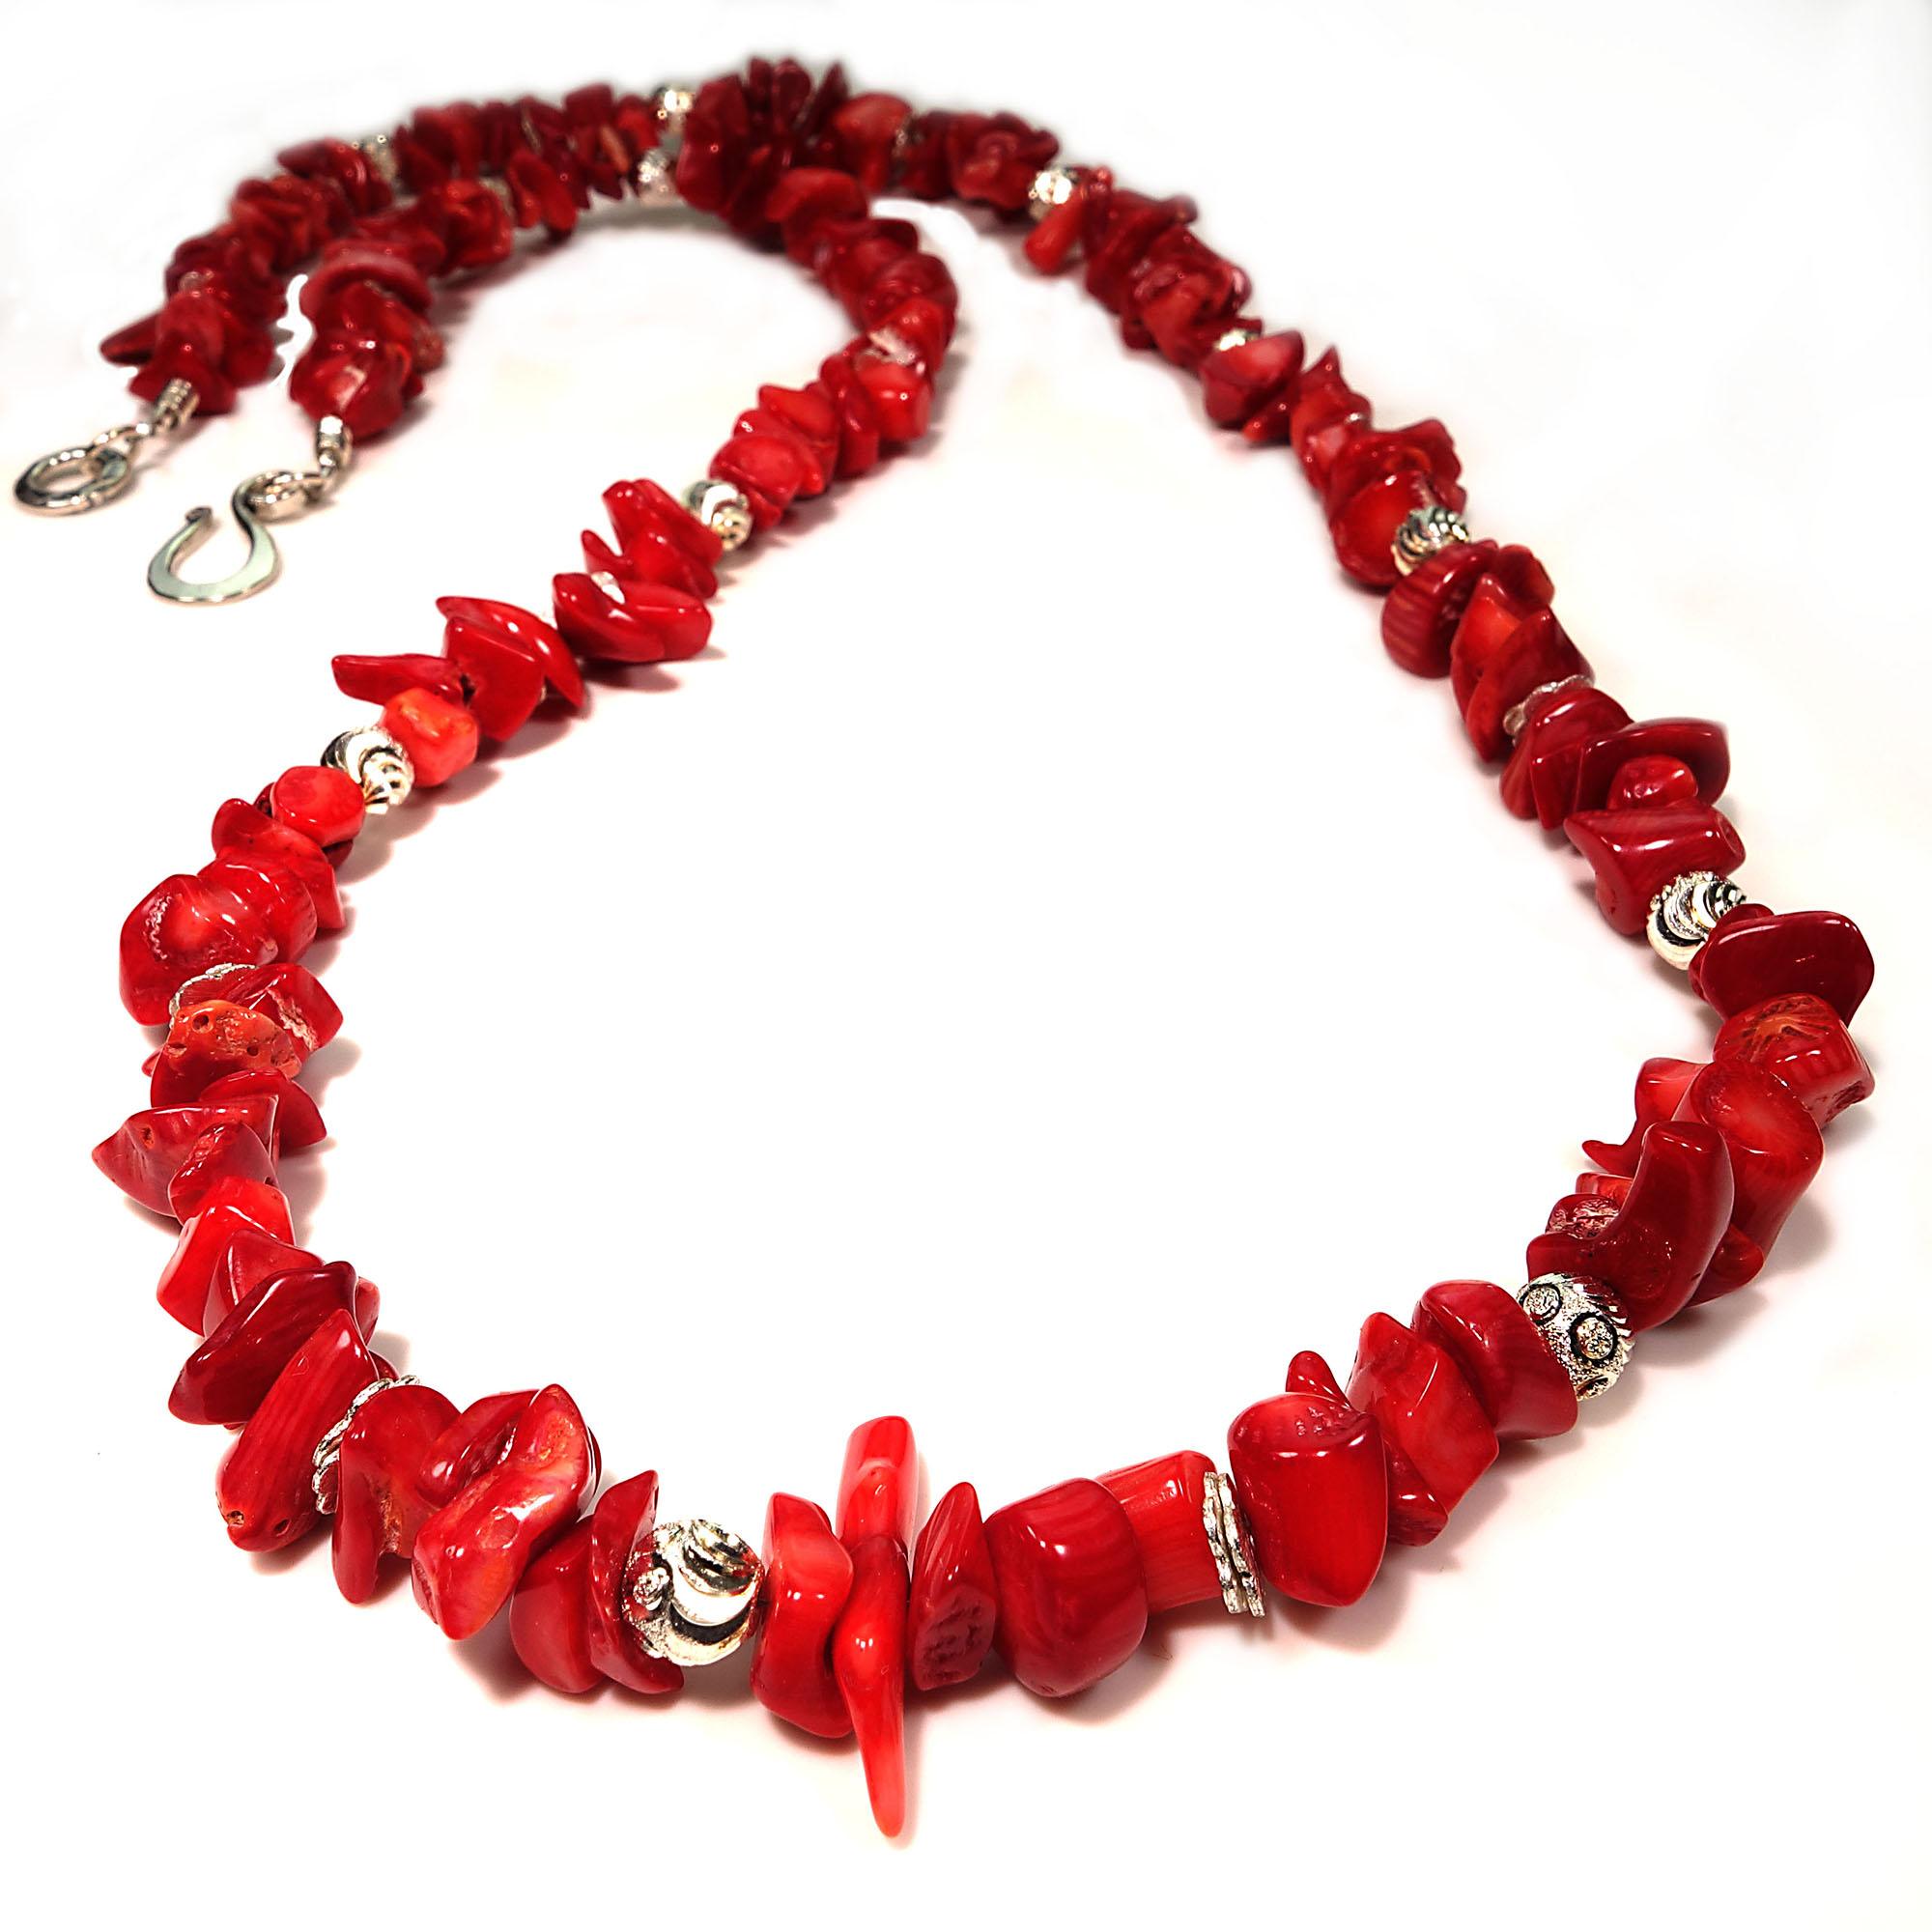 Artisan AJD 27 Inch Red Coral Necklace with Silver accents